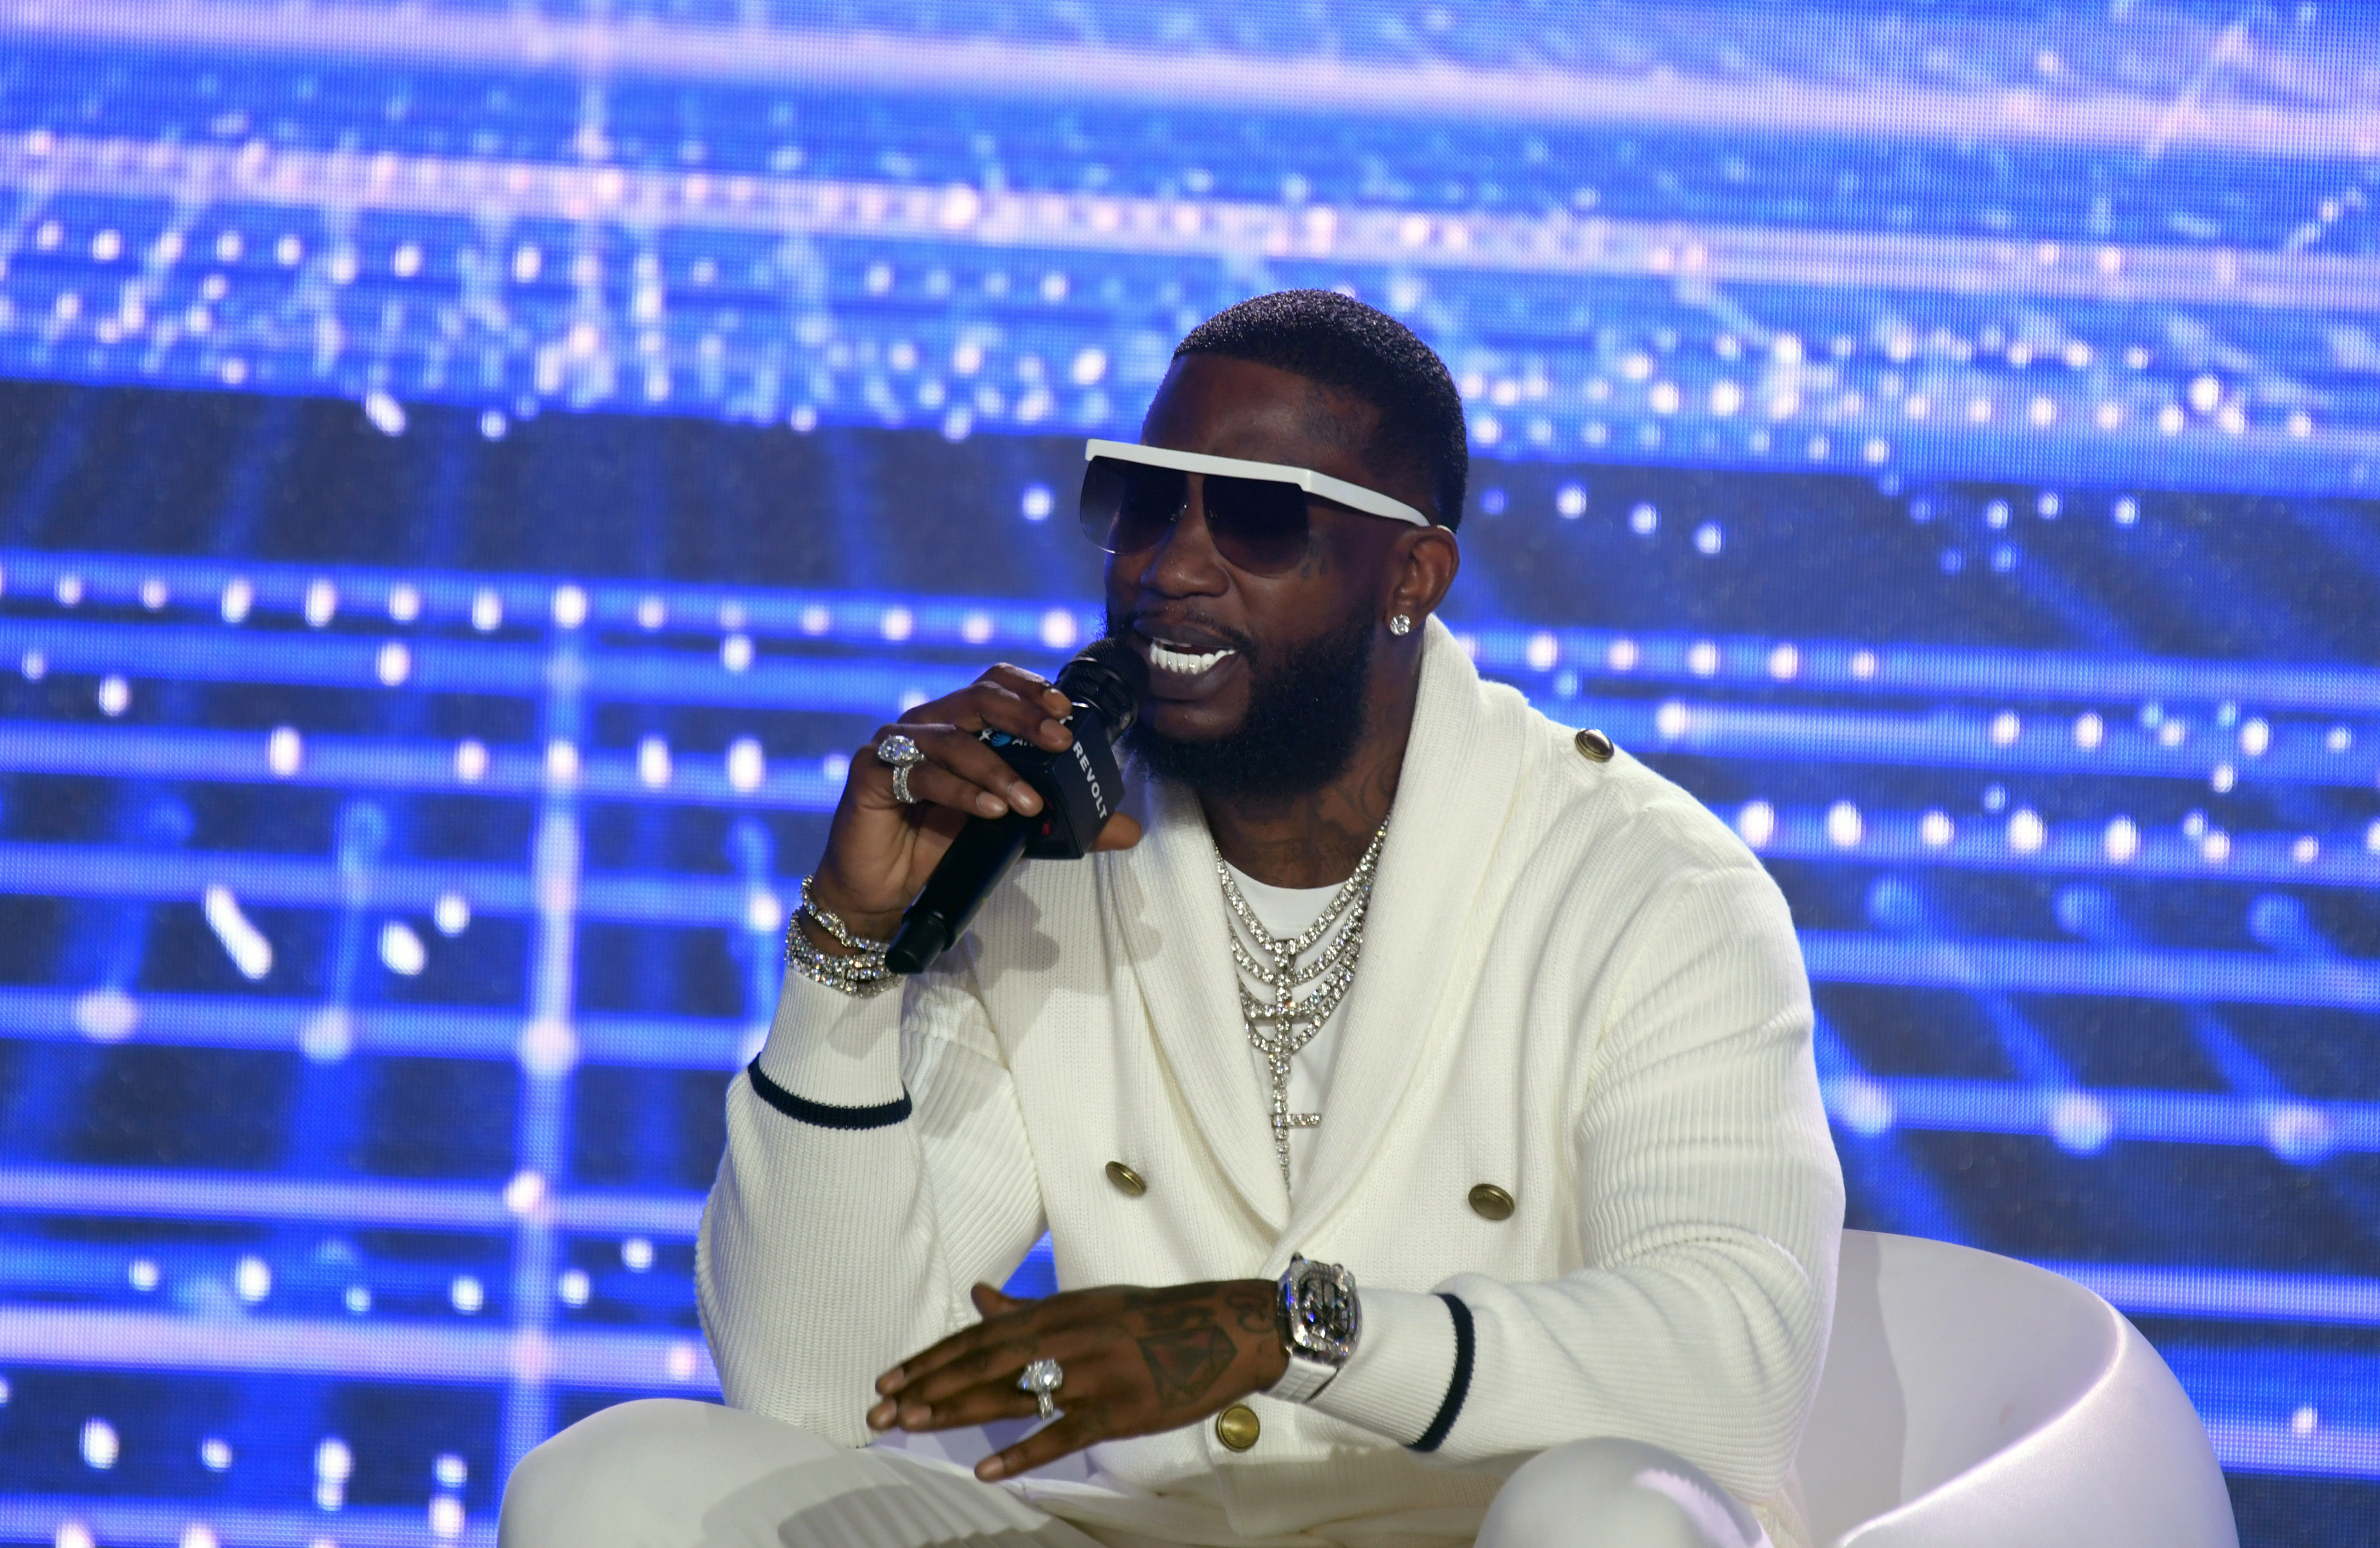 Gucci Mane Says He Has $1M For B.G. When He’s Released From Prison